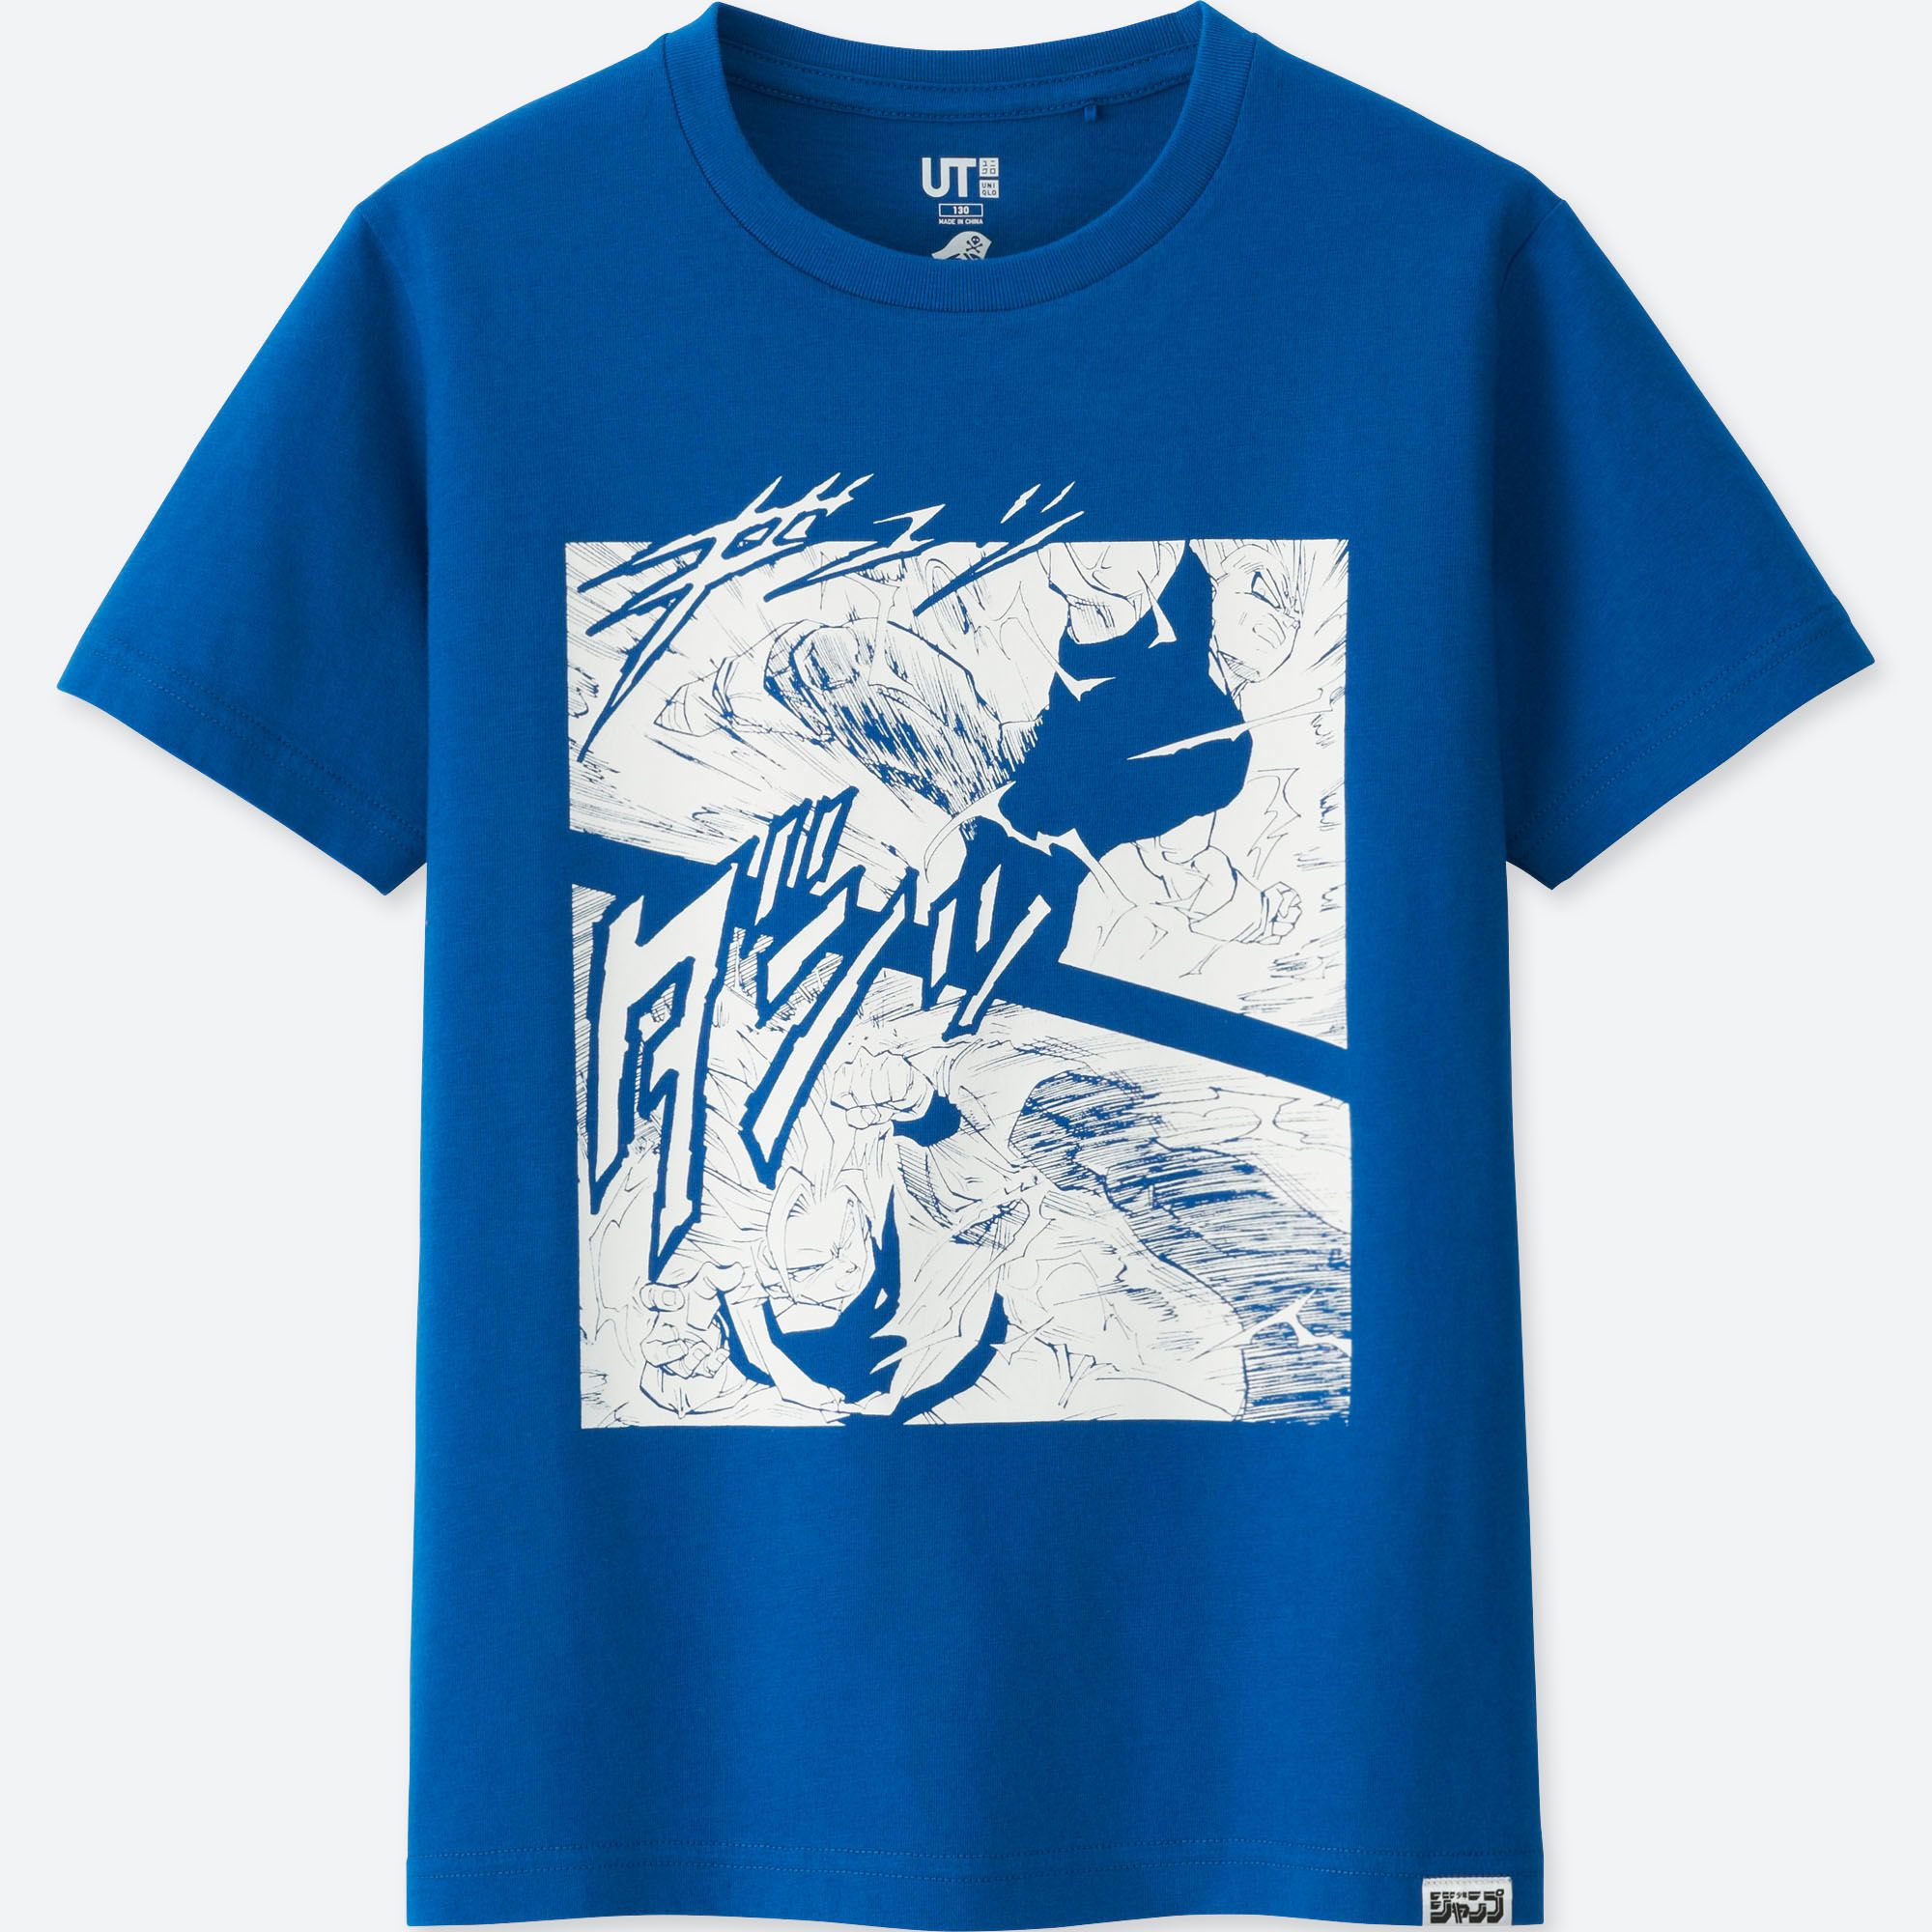 Celebrate Shonen Jump's 50th Anniversary with This Line from UNIQLO